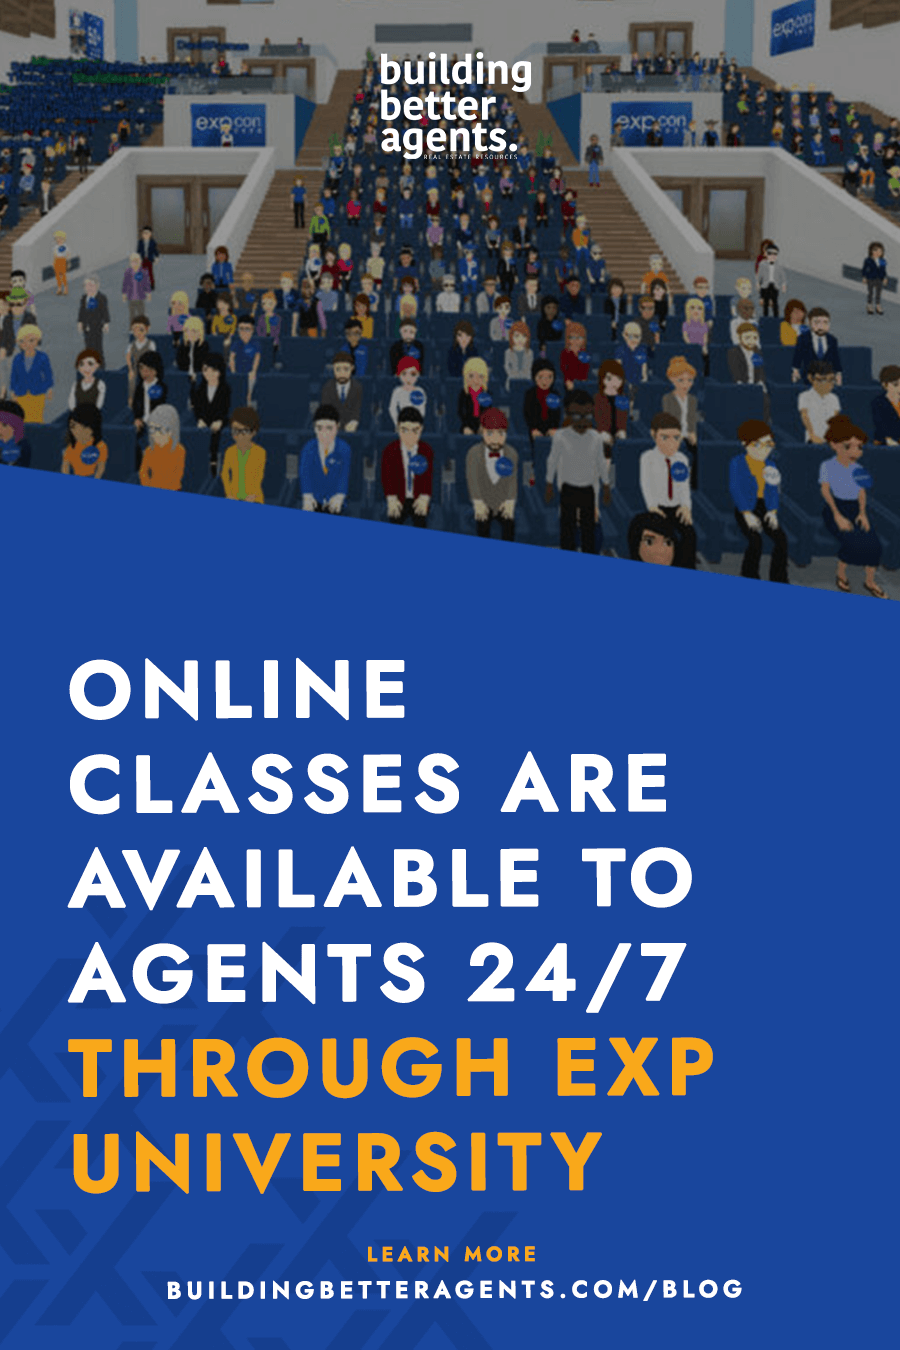 Online Classes Are Available To Agents 24/7 Through eXp University